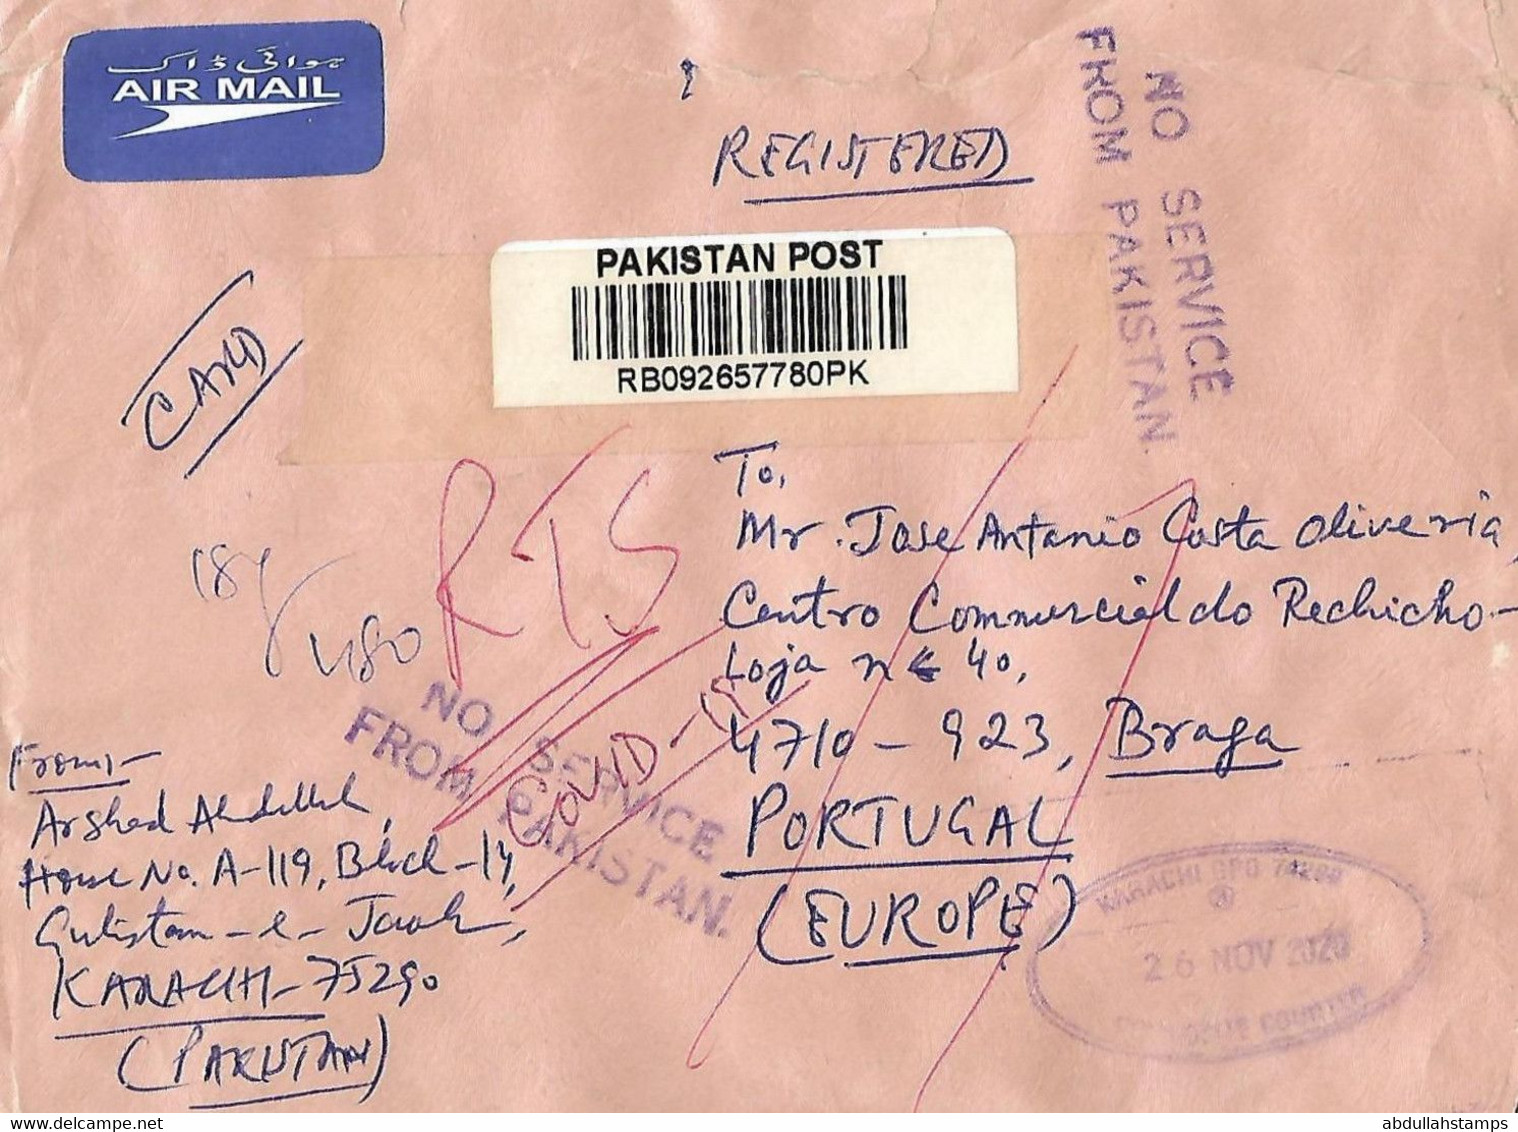 PAKISTAN 2020 AIRMAIL COVER TO PORTUGAL RETURNED WITH NO SERVICE FROM PAKISTAN RUBBER STAMP AND RTS COVID-19 POSTAL MARK - Covers & Documents